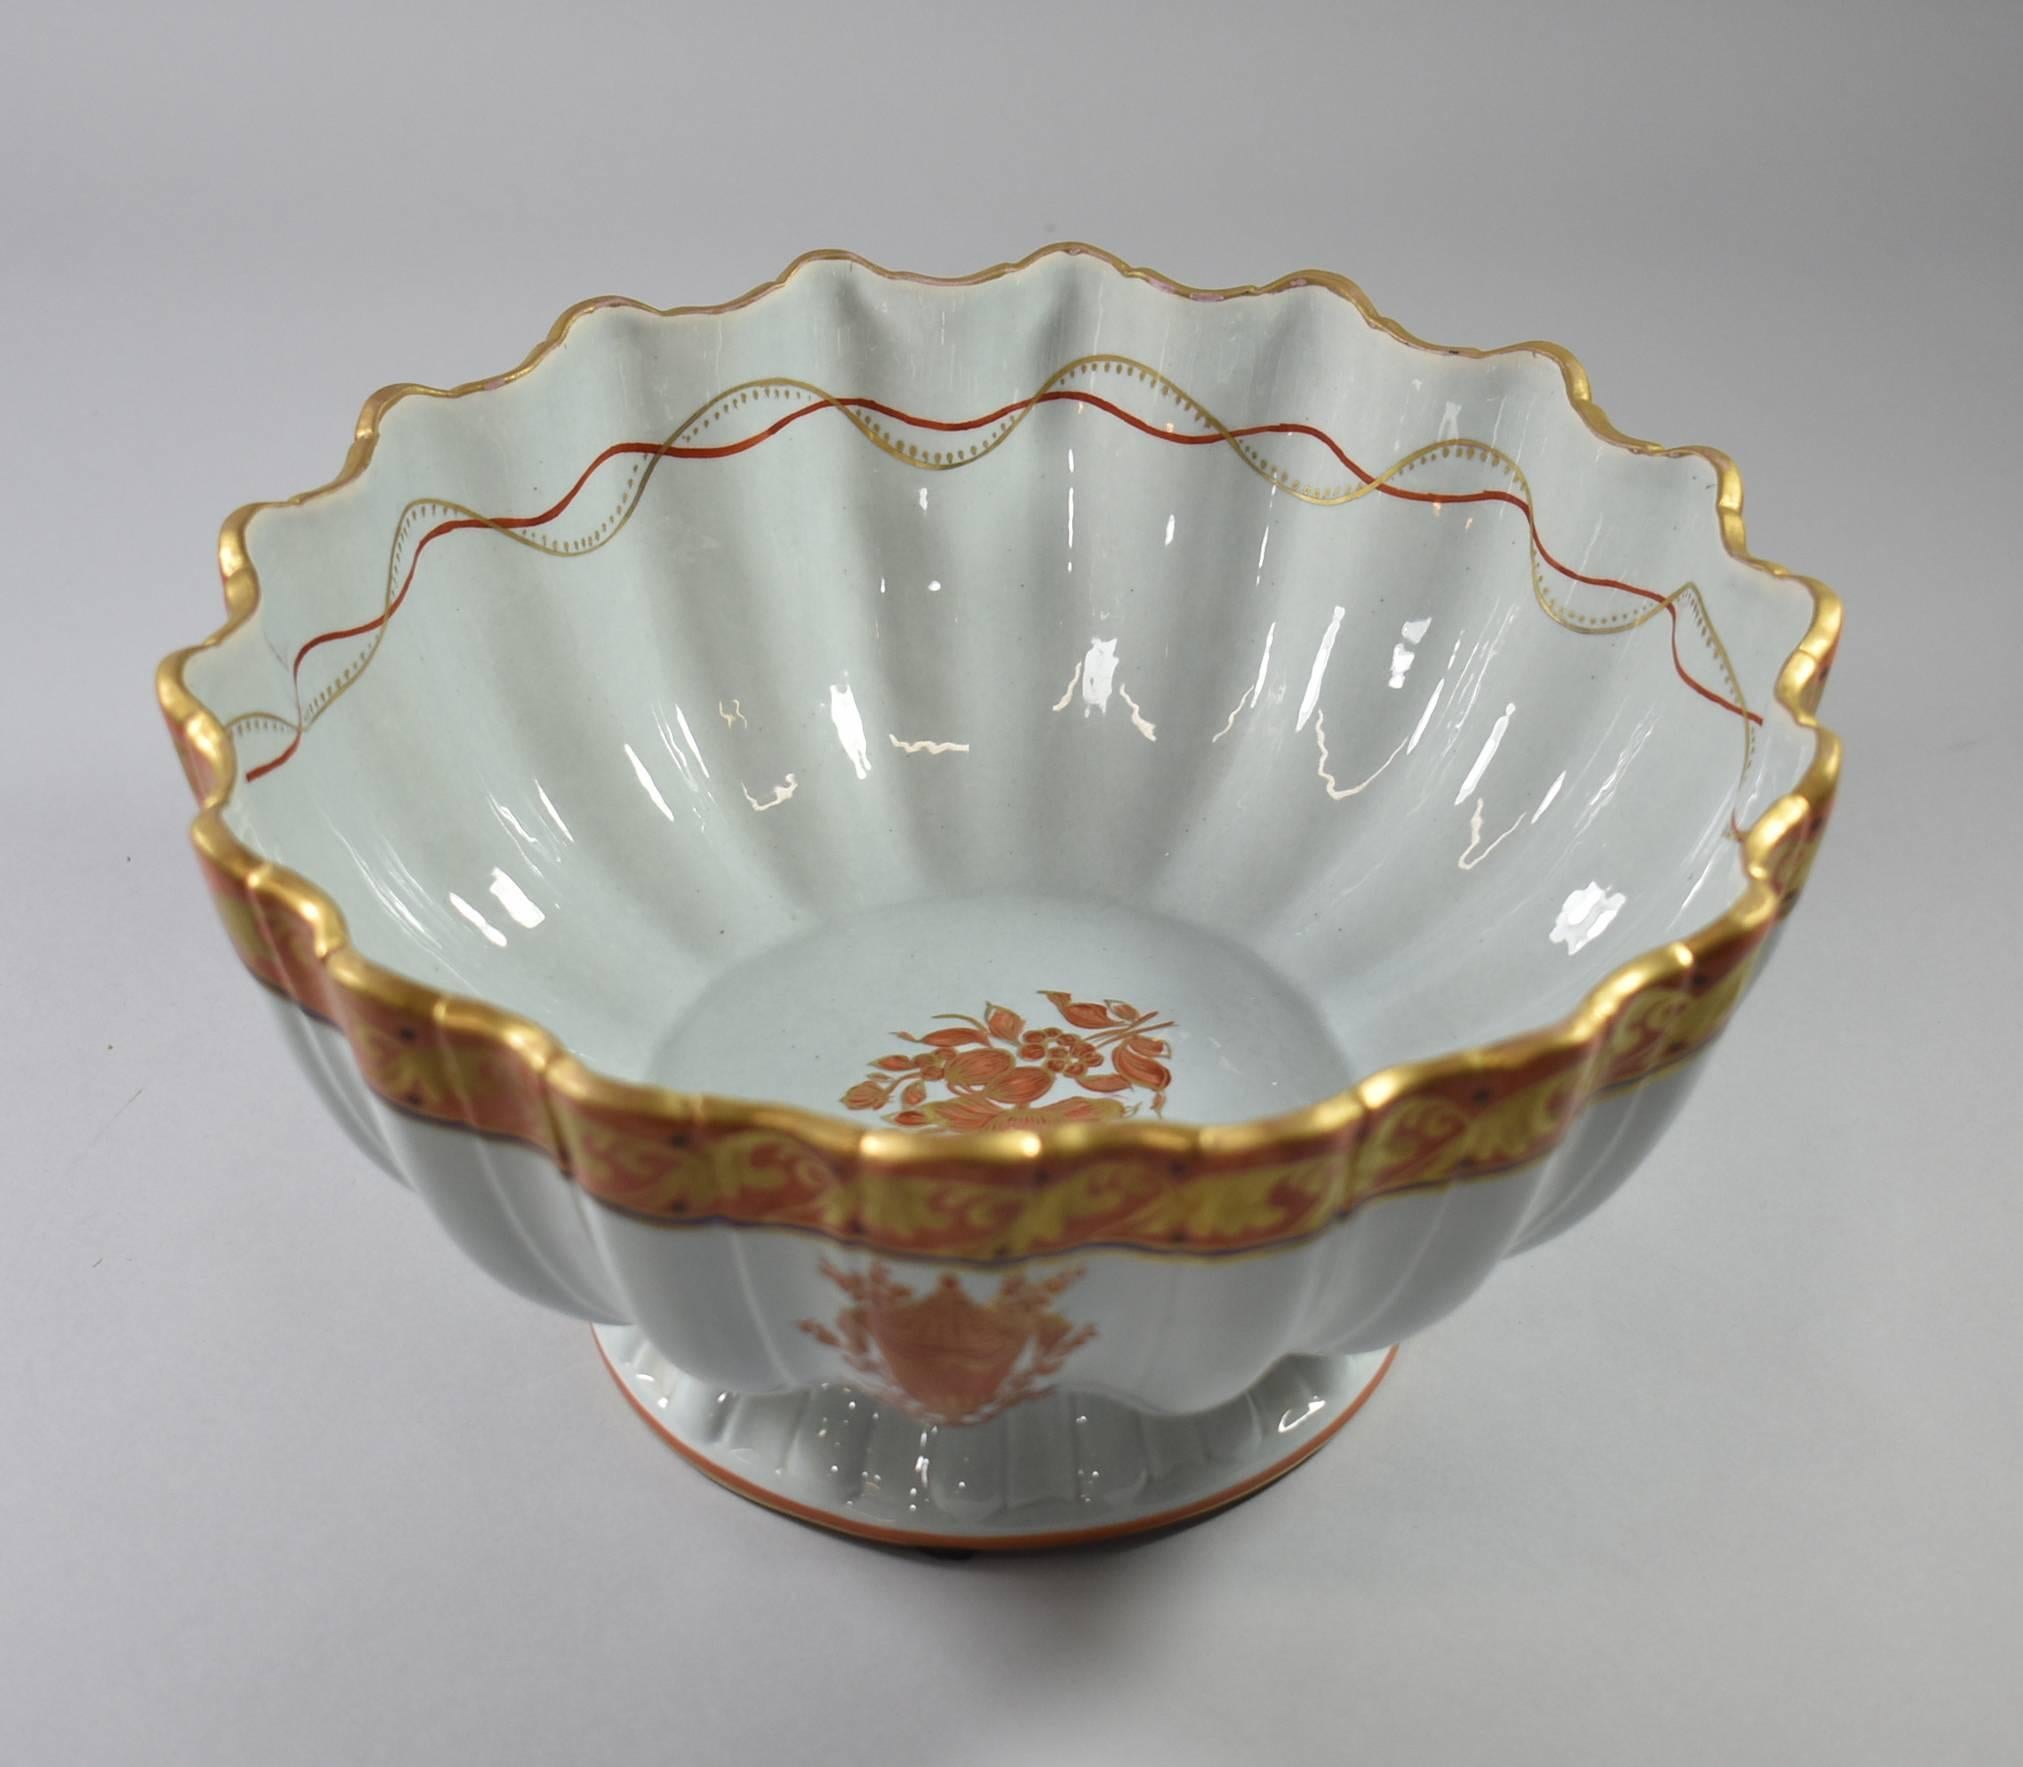 A magnificent Italian bowl by Mottahedeh. This beautiful footed bowl features a scalloped edge with an urn detail in shades of orange and gold. Mottahedeh did custom work for many high end jewellery stores and was known for supplying the White